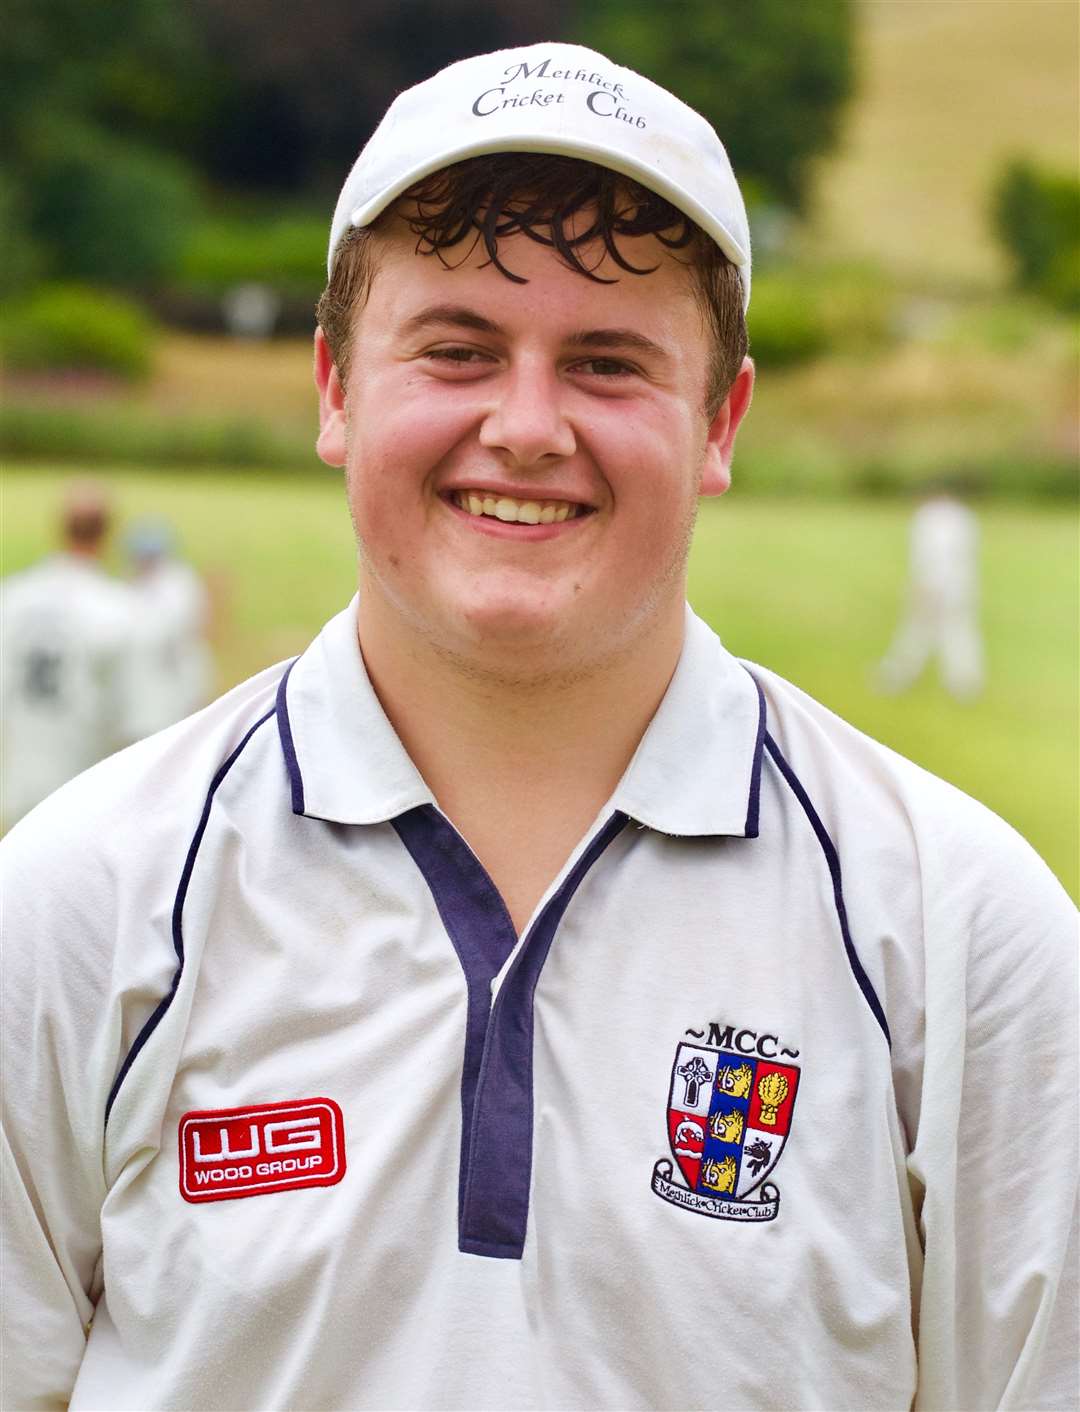 Fraser Grant captained the Methlick second team for the first time and opened the bowling. Picture: Phil Harman